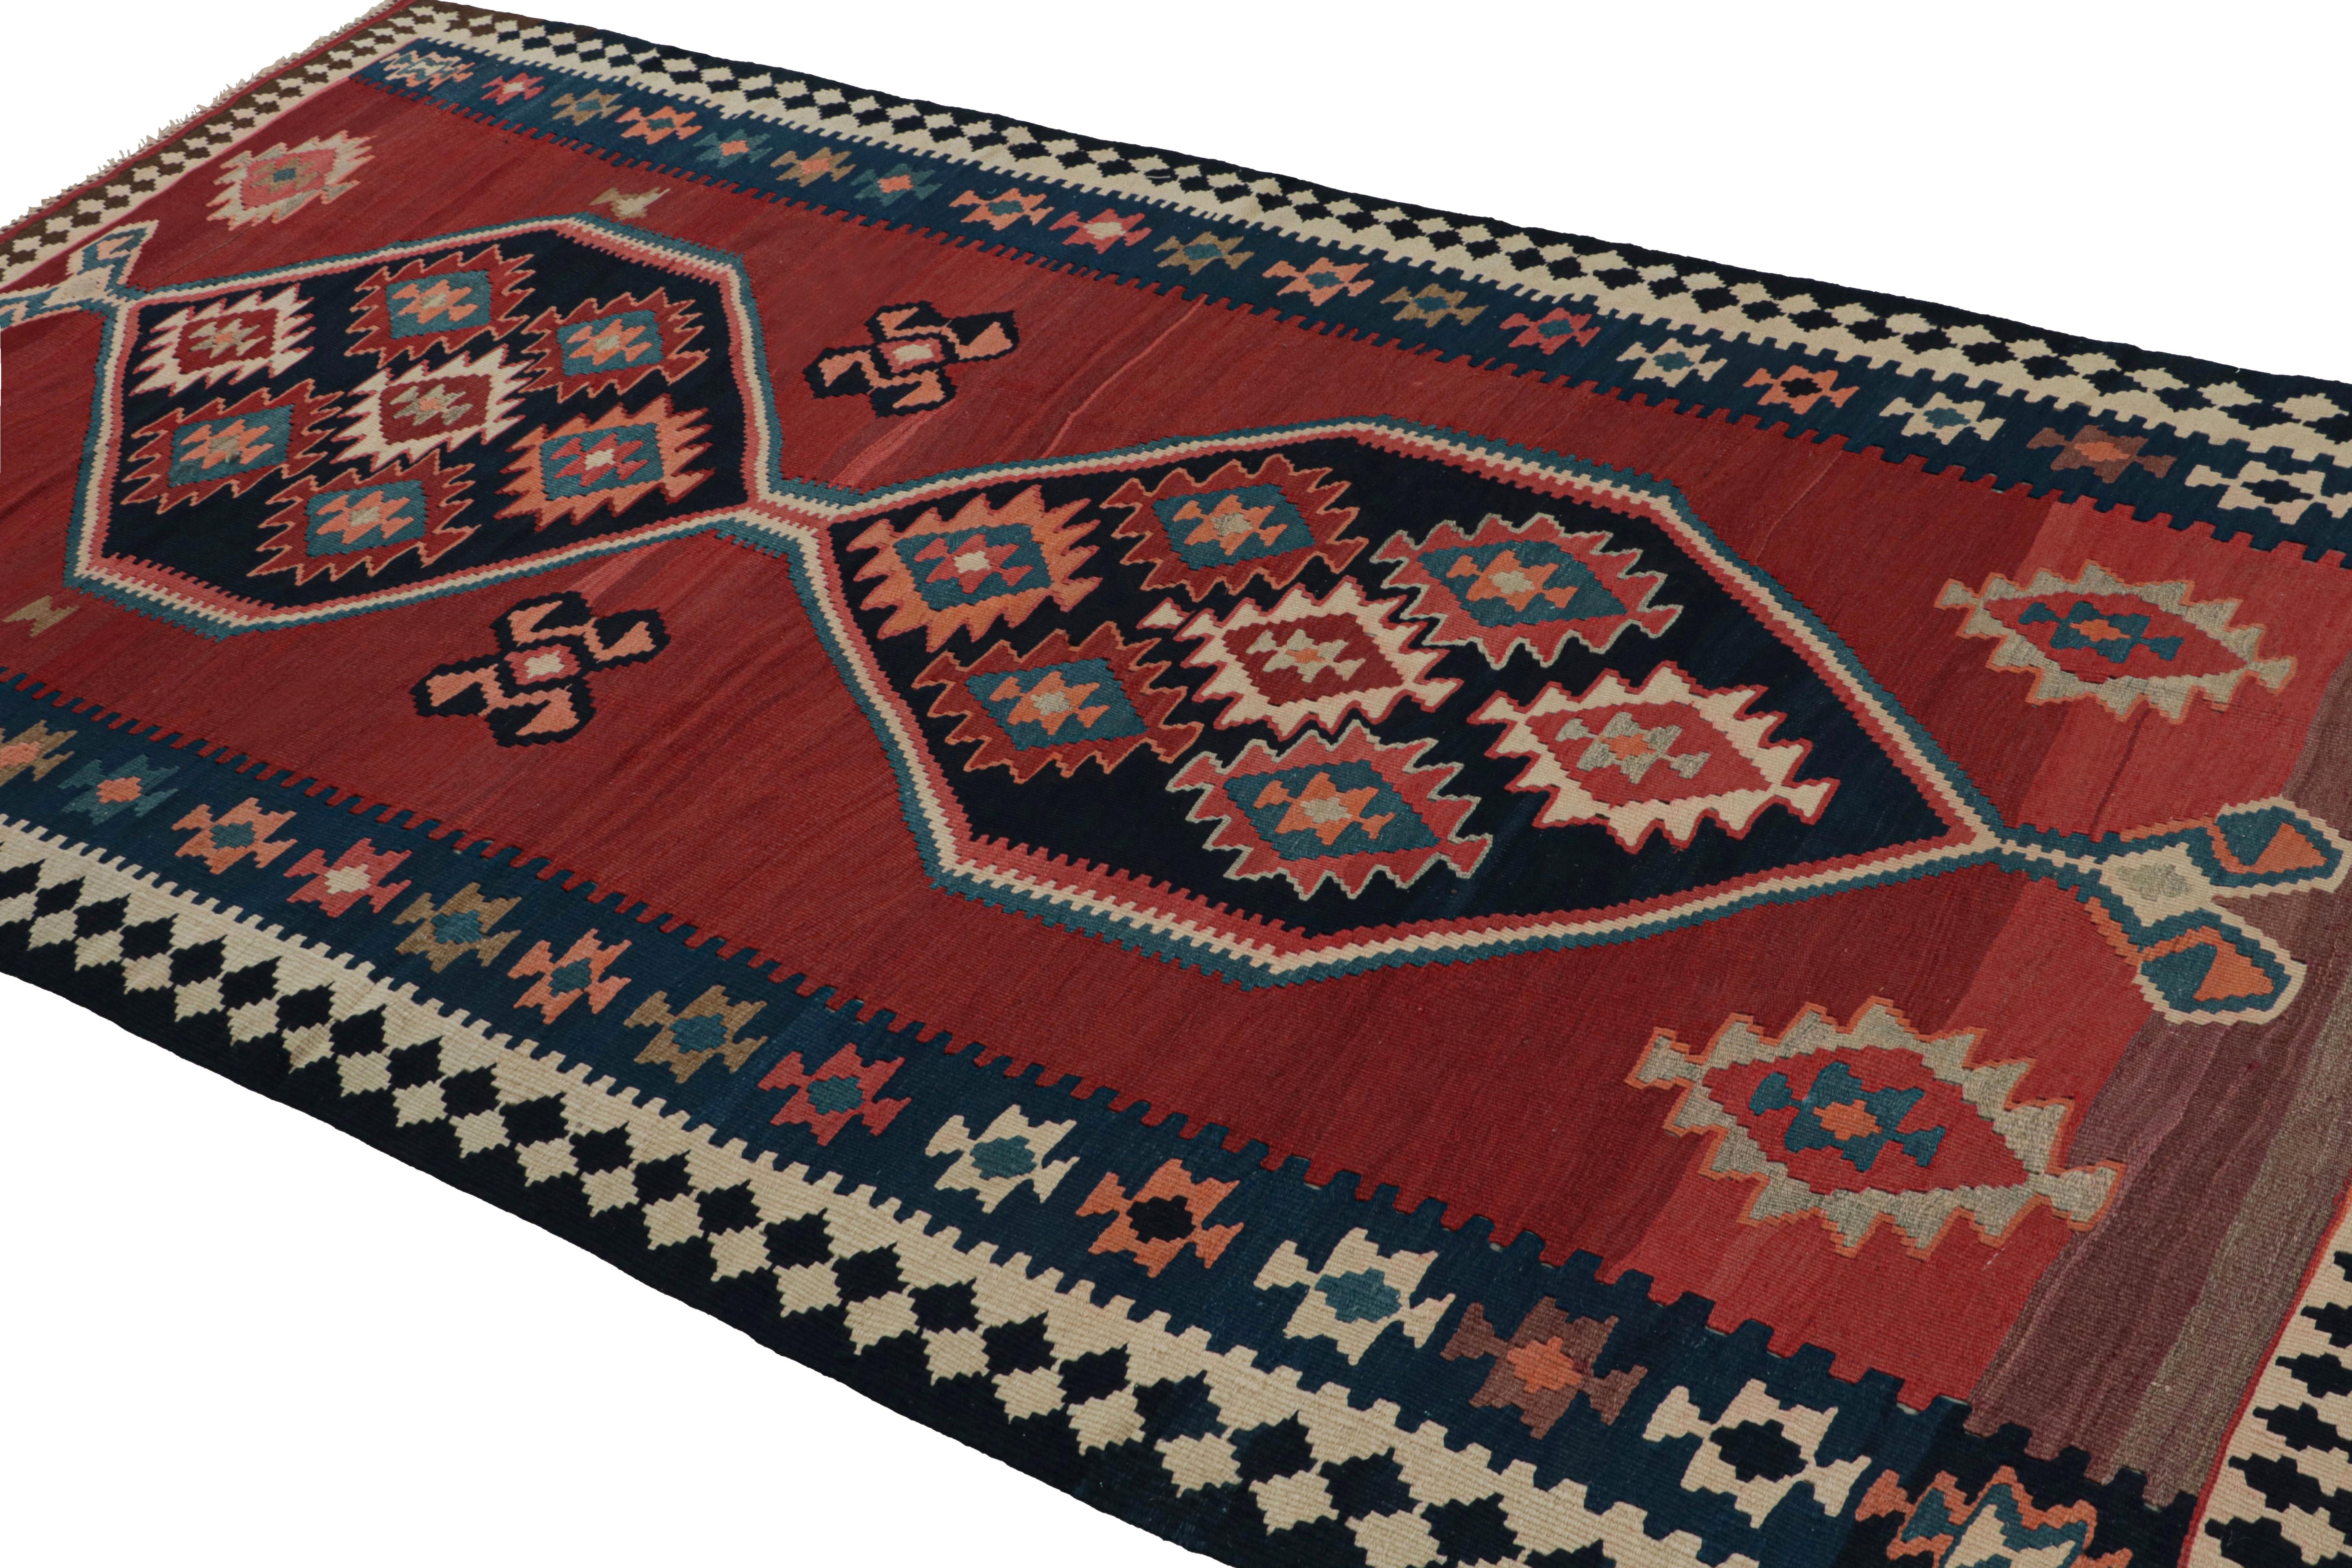 Handwoven in wool, circa 1950-1960, this 5x10 Afghani tribal Kilim rug, with medallion and open field style together, is a special curation in the Rug & Kilim collection. 

On the Design: 

A special piece in the Rug & Kilim collection, this rug